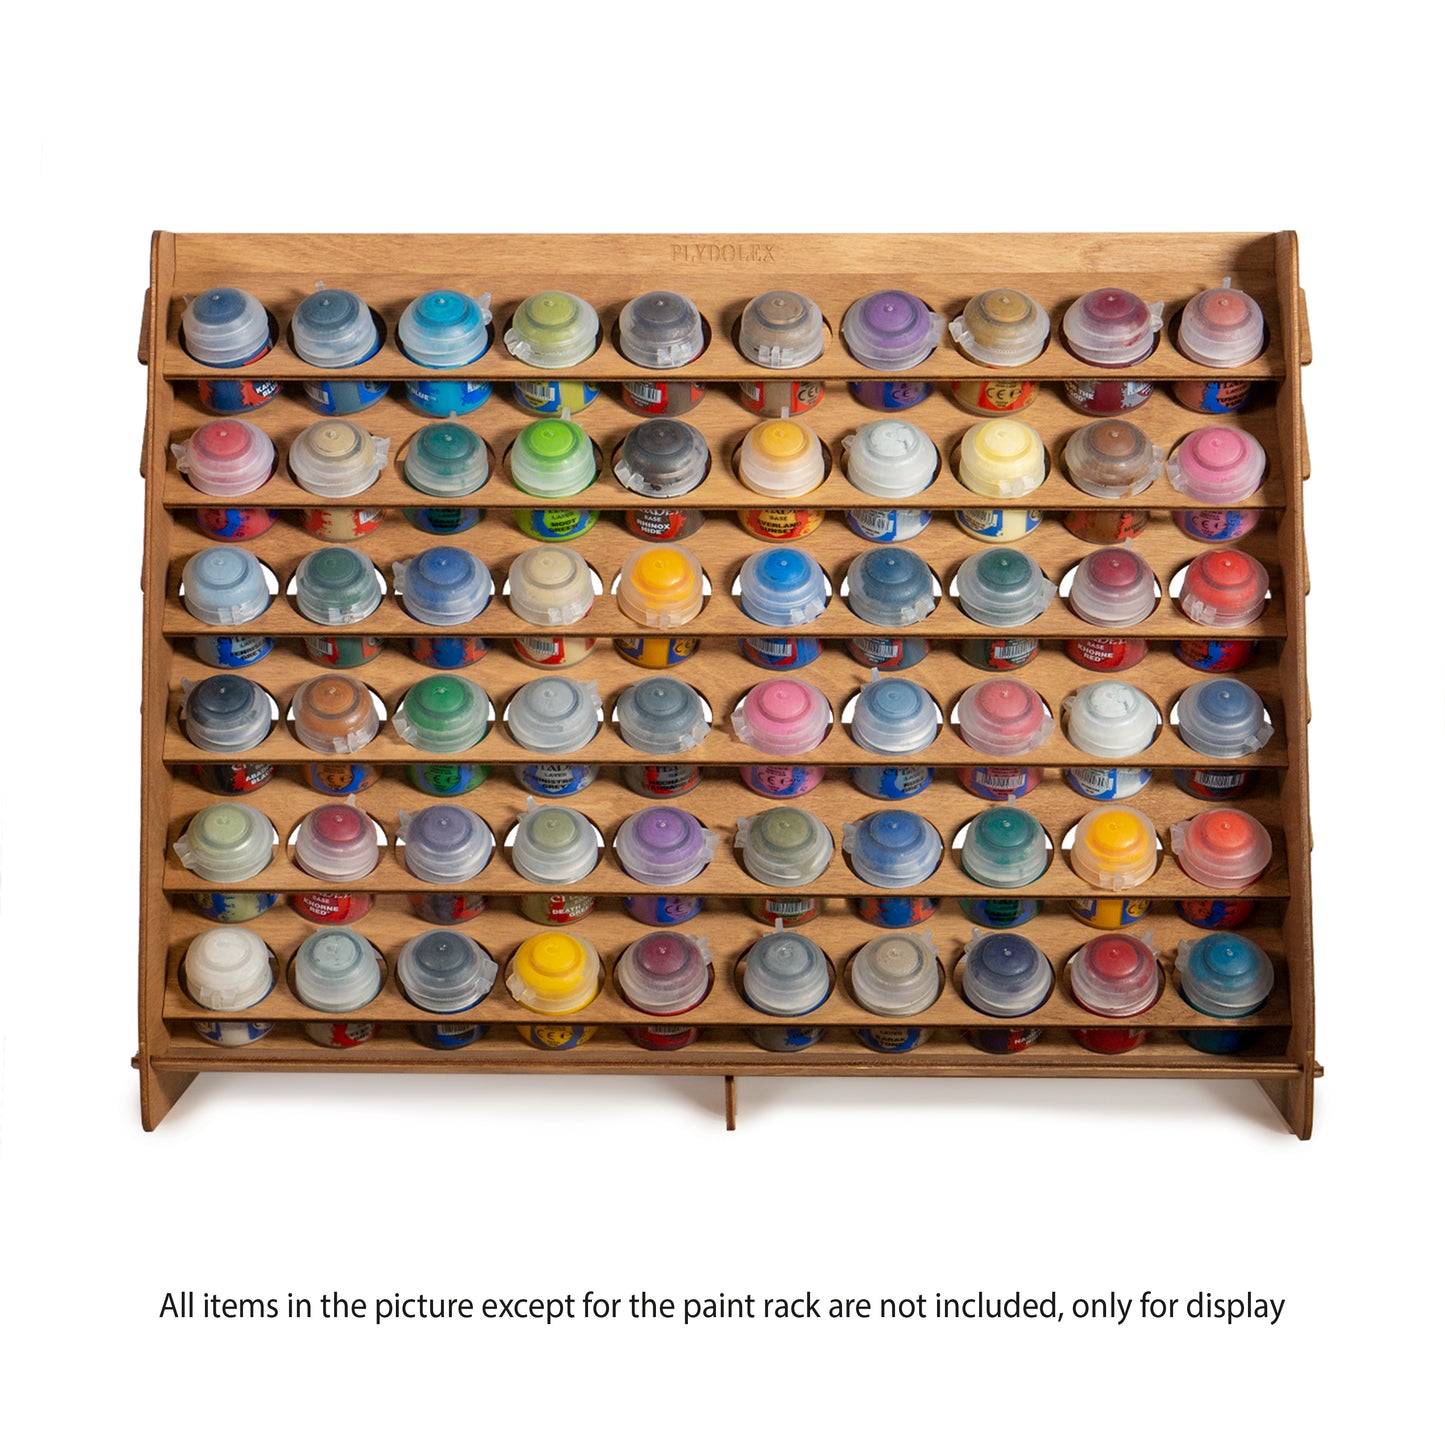 Plydolex Citadel Paint Rack Organizer with 60 Holes for Miniature Paint Set - Wall-Mounted Wooden Craft Paint Storage Rack - Craft Paint Holder Rack